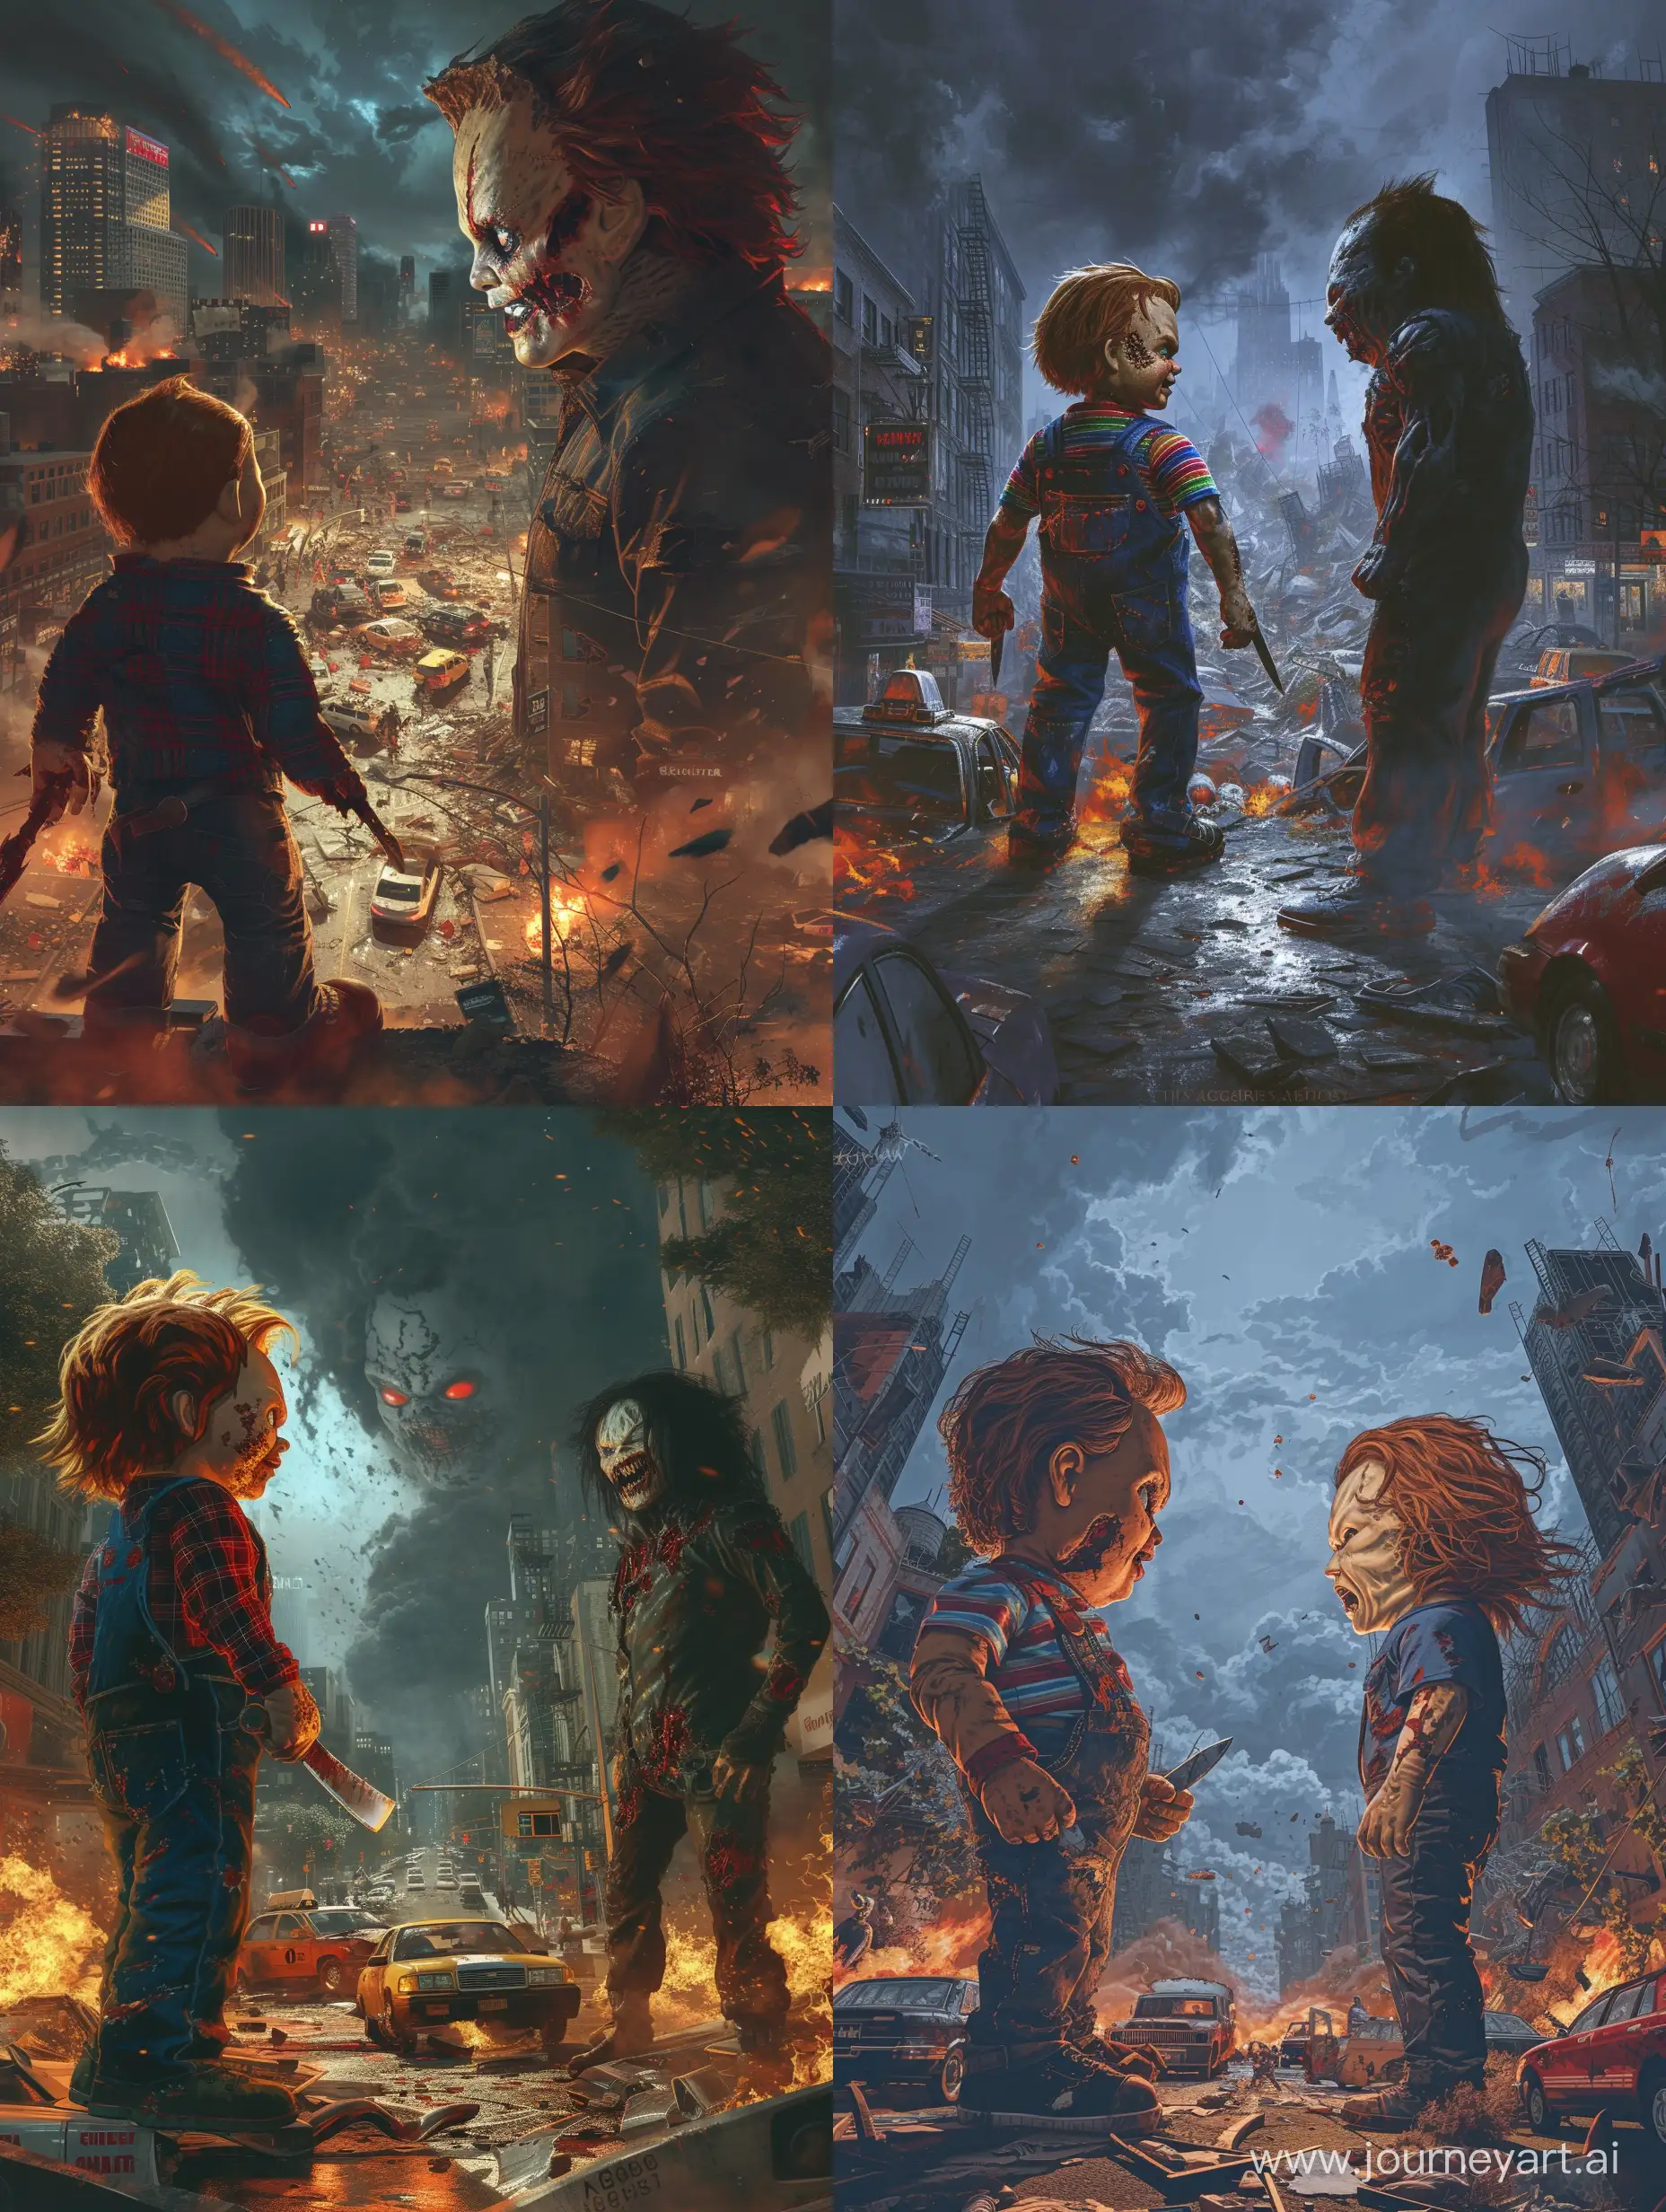 Chucky vs. Ghostface, all in very large scales, Chucky and Ghostface stand facing each other, depicted on a monumental scale where their figures dominate the entire cityscape. Chucky, with a distorted face and a knife in hand, gazes upon Ghostface, who looks back at him with a horrified expression. Around them, destroyed buildings, burning cars, and ominous clouds of smoke are visible, reflecting the atmosphere of chaos and struggle for survival. The art style lends a surrealistic appearance to the scene, with subdued colors and dark tones to emphasize the tension and battle atmosphere. The camera angle is chosen to capture the full scale of the confrontation between Chucky and Ghostface, highlighting their powerful figures and strength. Visualized with high resolution and natural lighting to accentuate the realism of the scene.